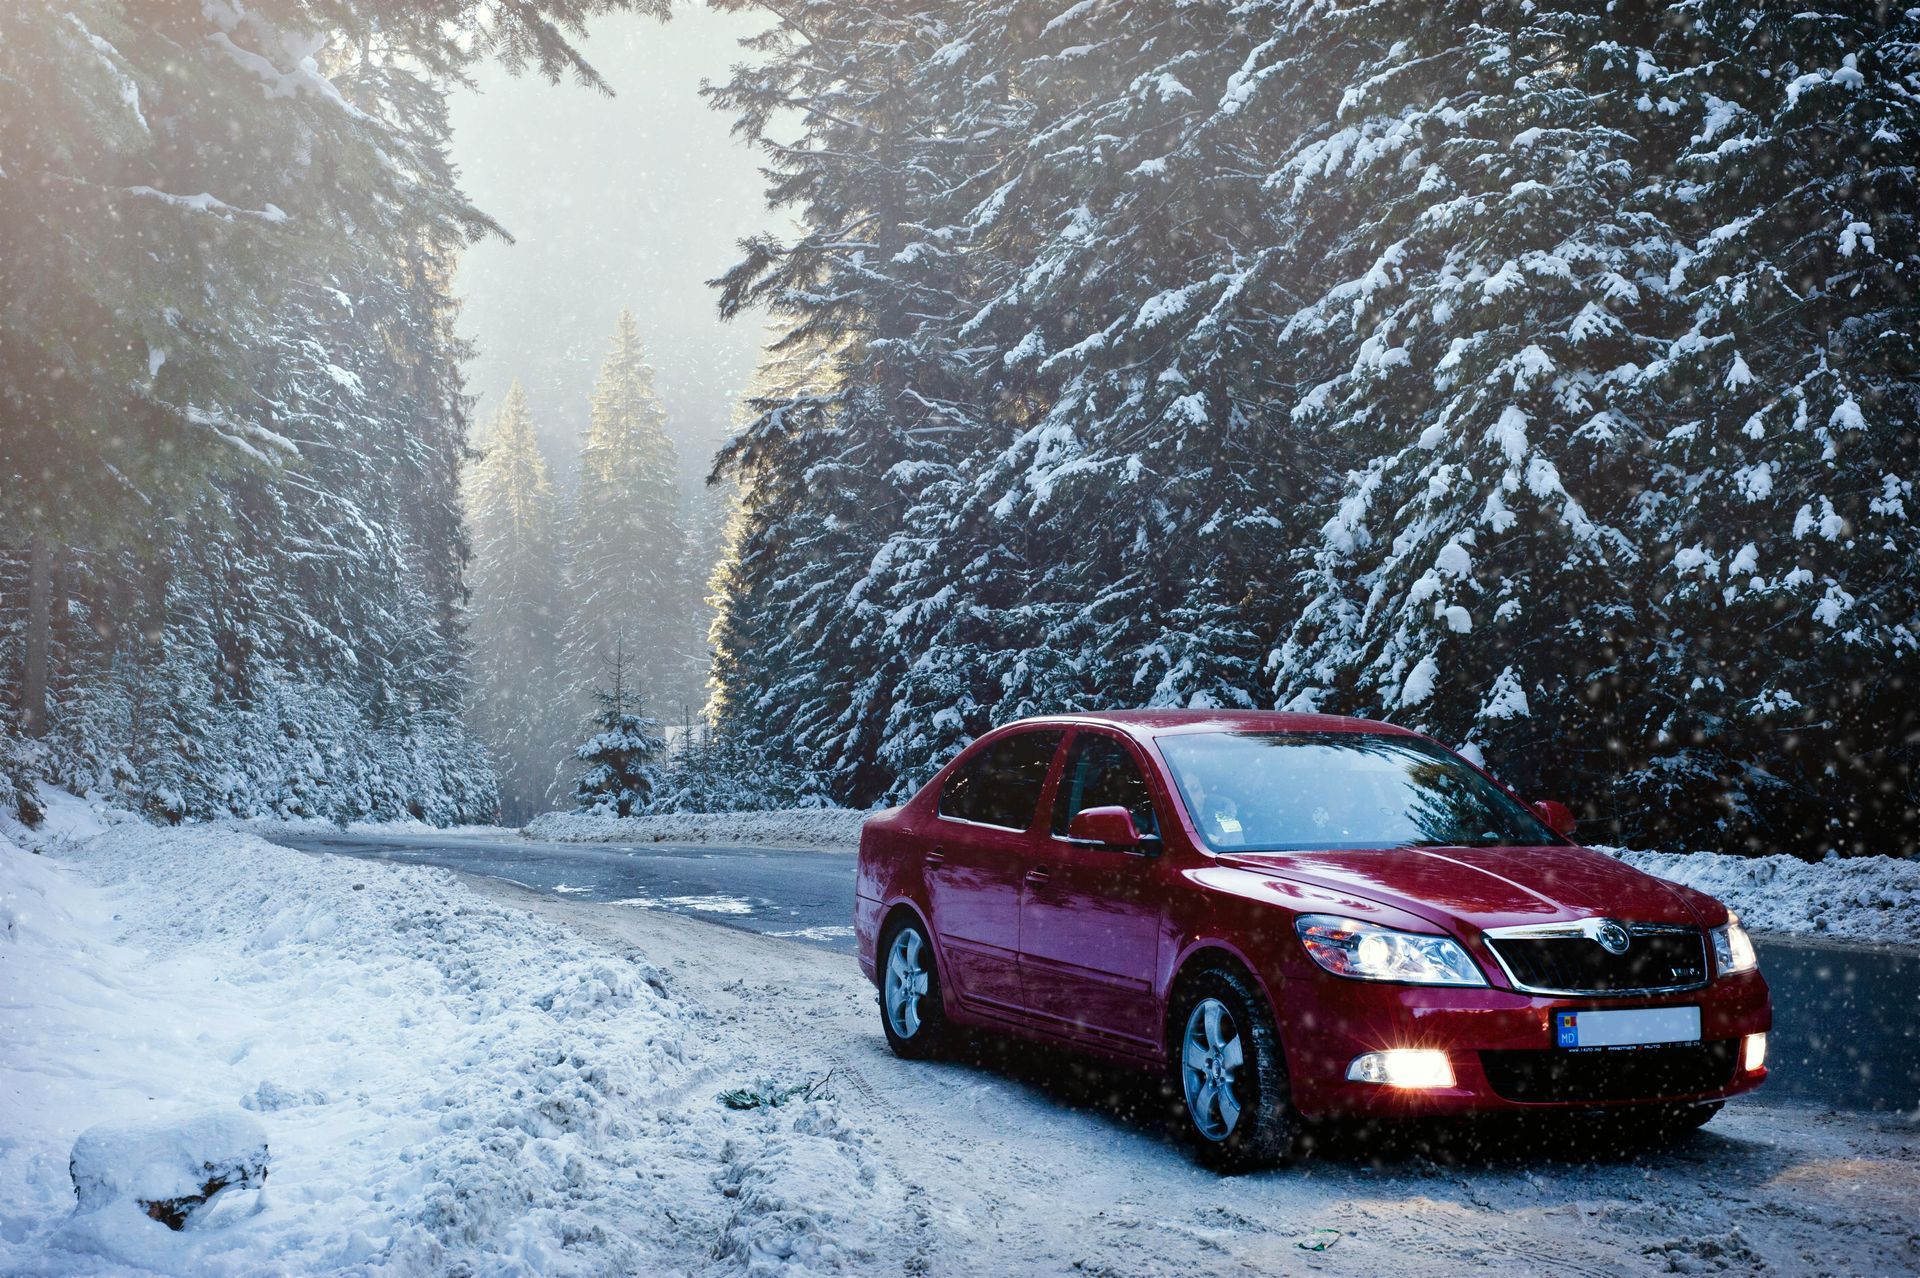 A red car is driving down a snowy road in the woods.